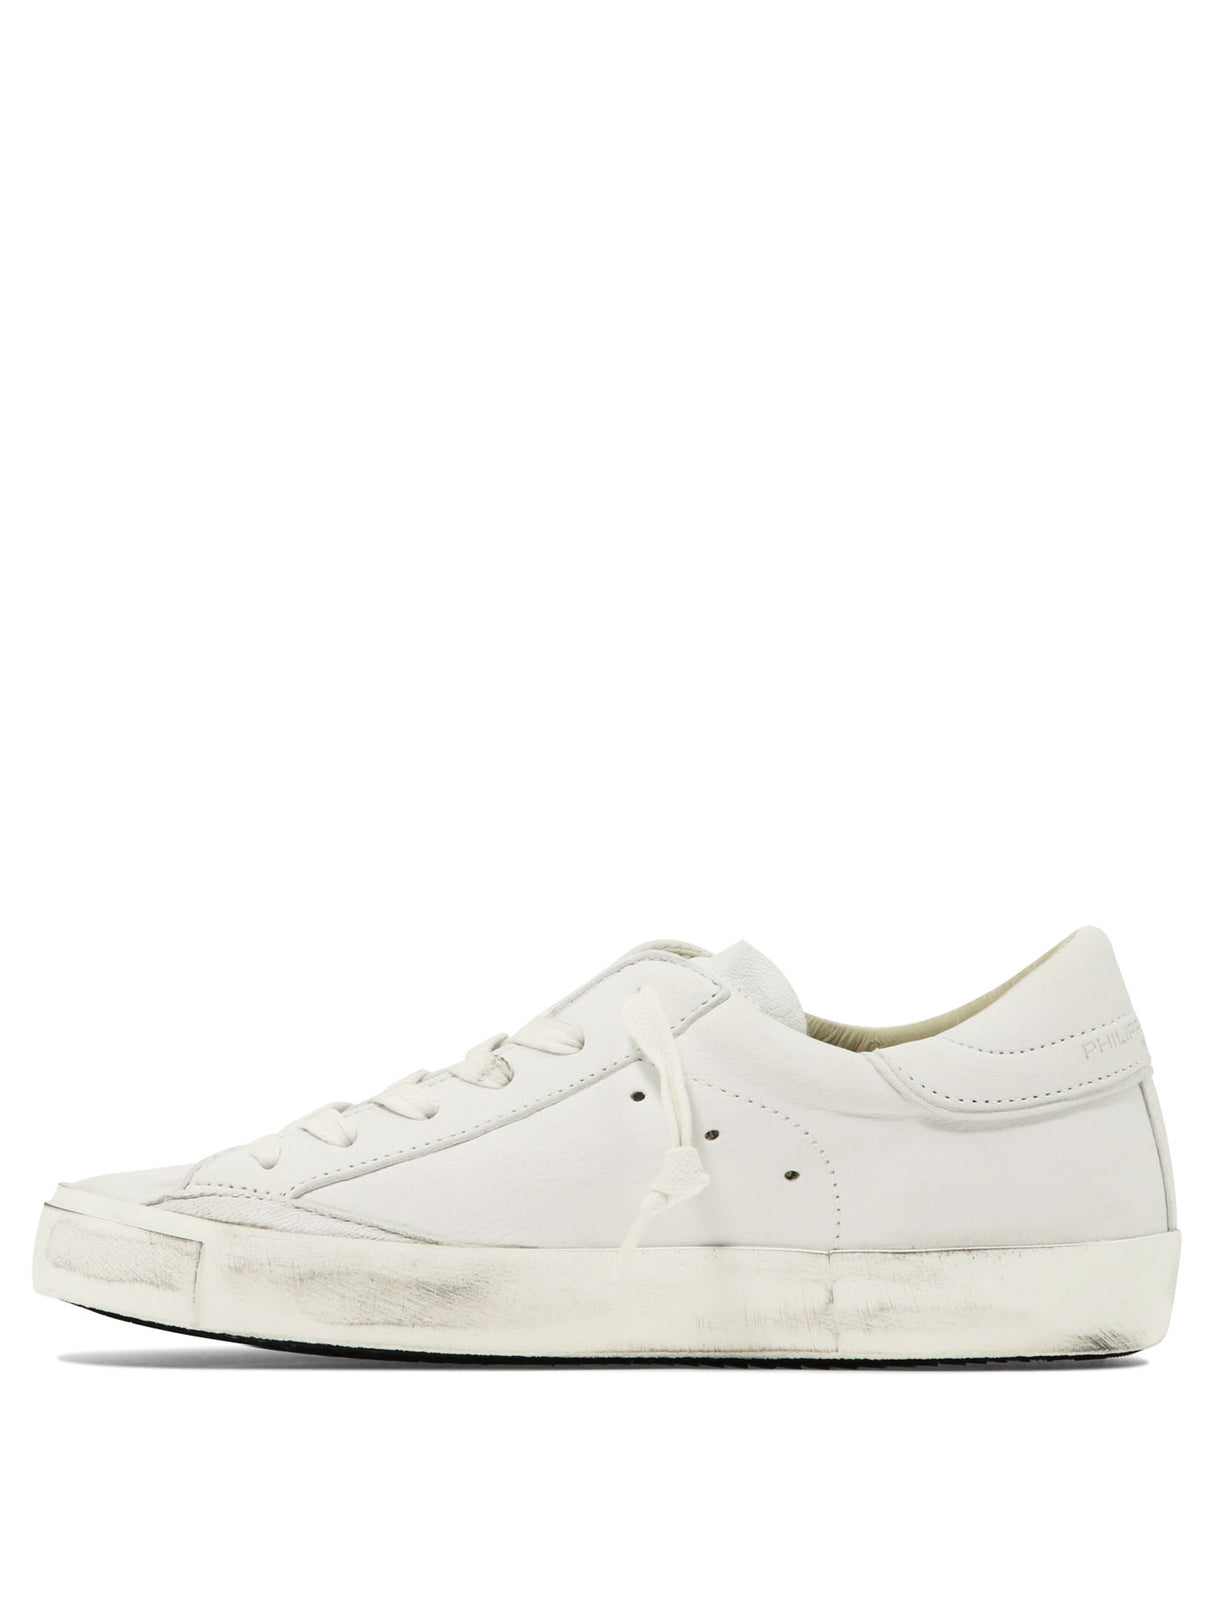 PHILIPPE MODEL PARIS White Leather Sneakers for Women - SS24 Collection